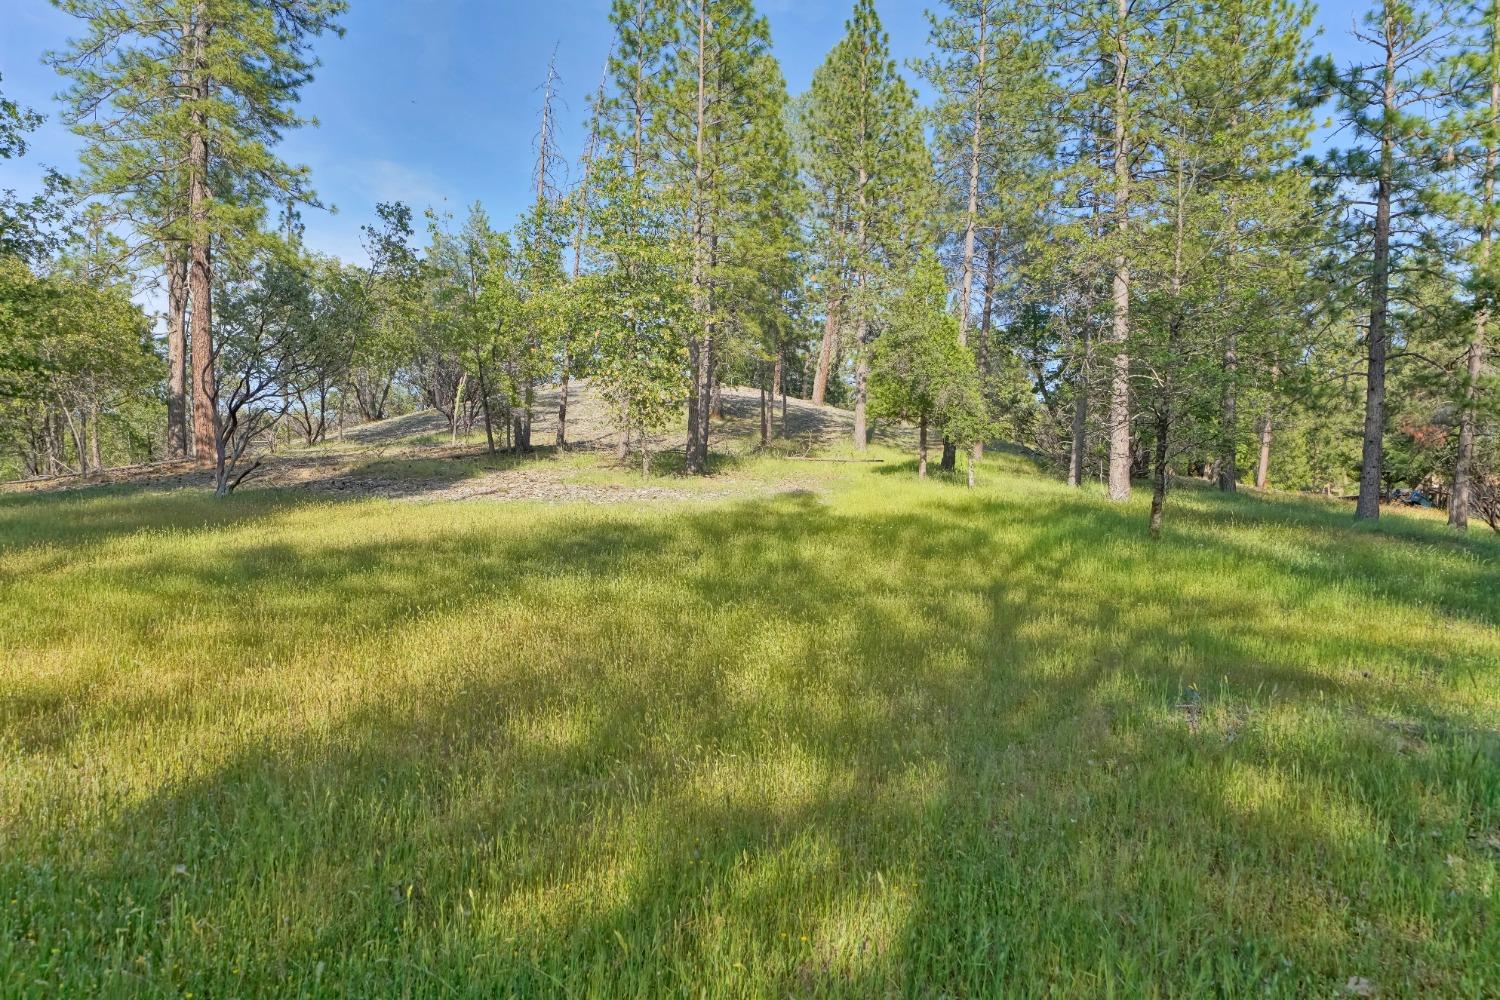 Nice 5-acre parcel minutes to Camino/Apple Hill or award winning El Dorado County Wineries, restaurants and grocery store. Brush on this property has been masticated and shows very nicely. Few trees on property, nice and open/airy. Want more than this beautiful 5 acres? Adjacent property is also listed, MLS #222067737